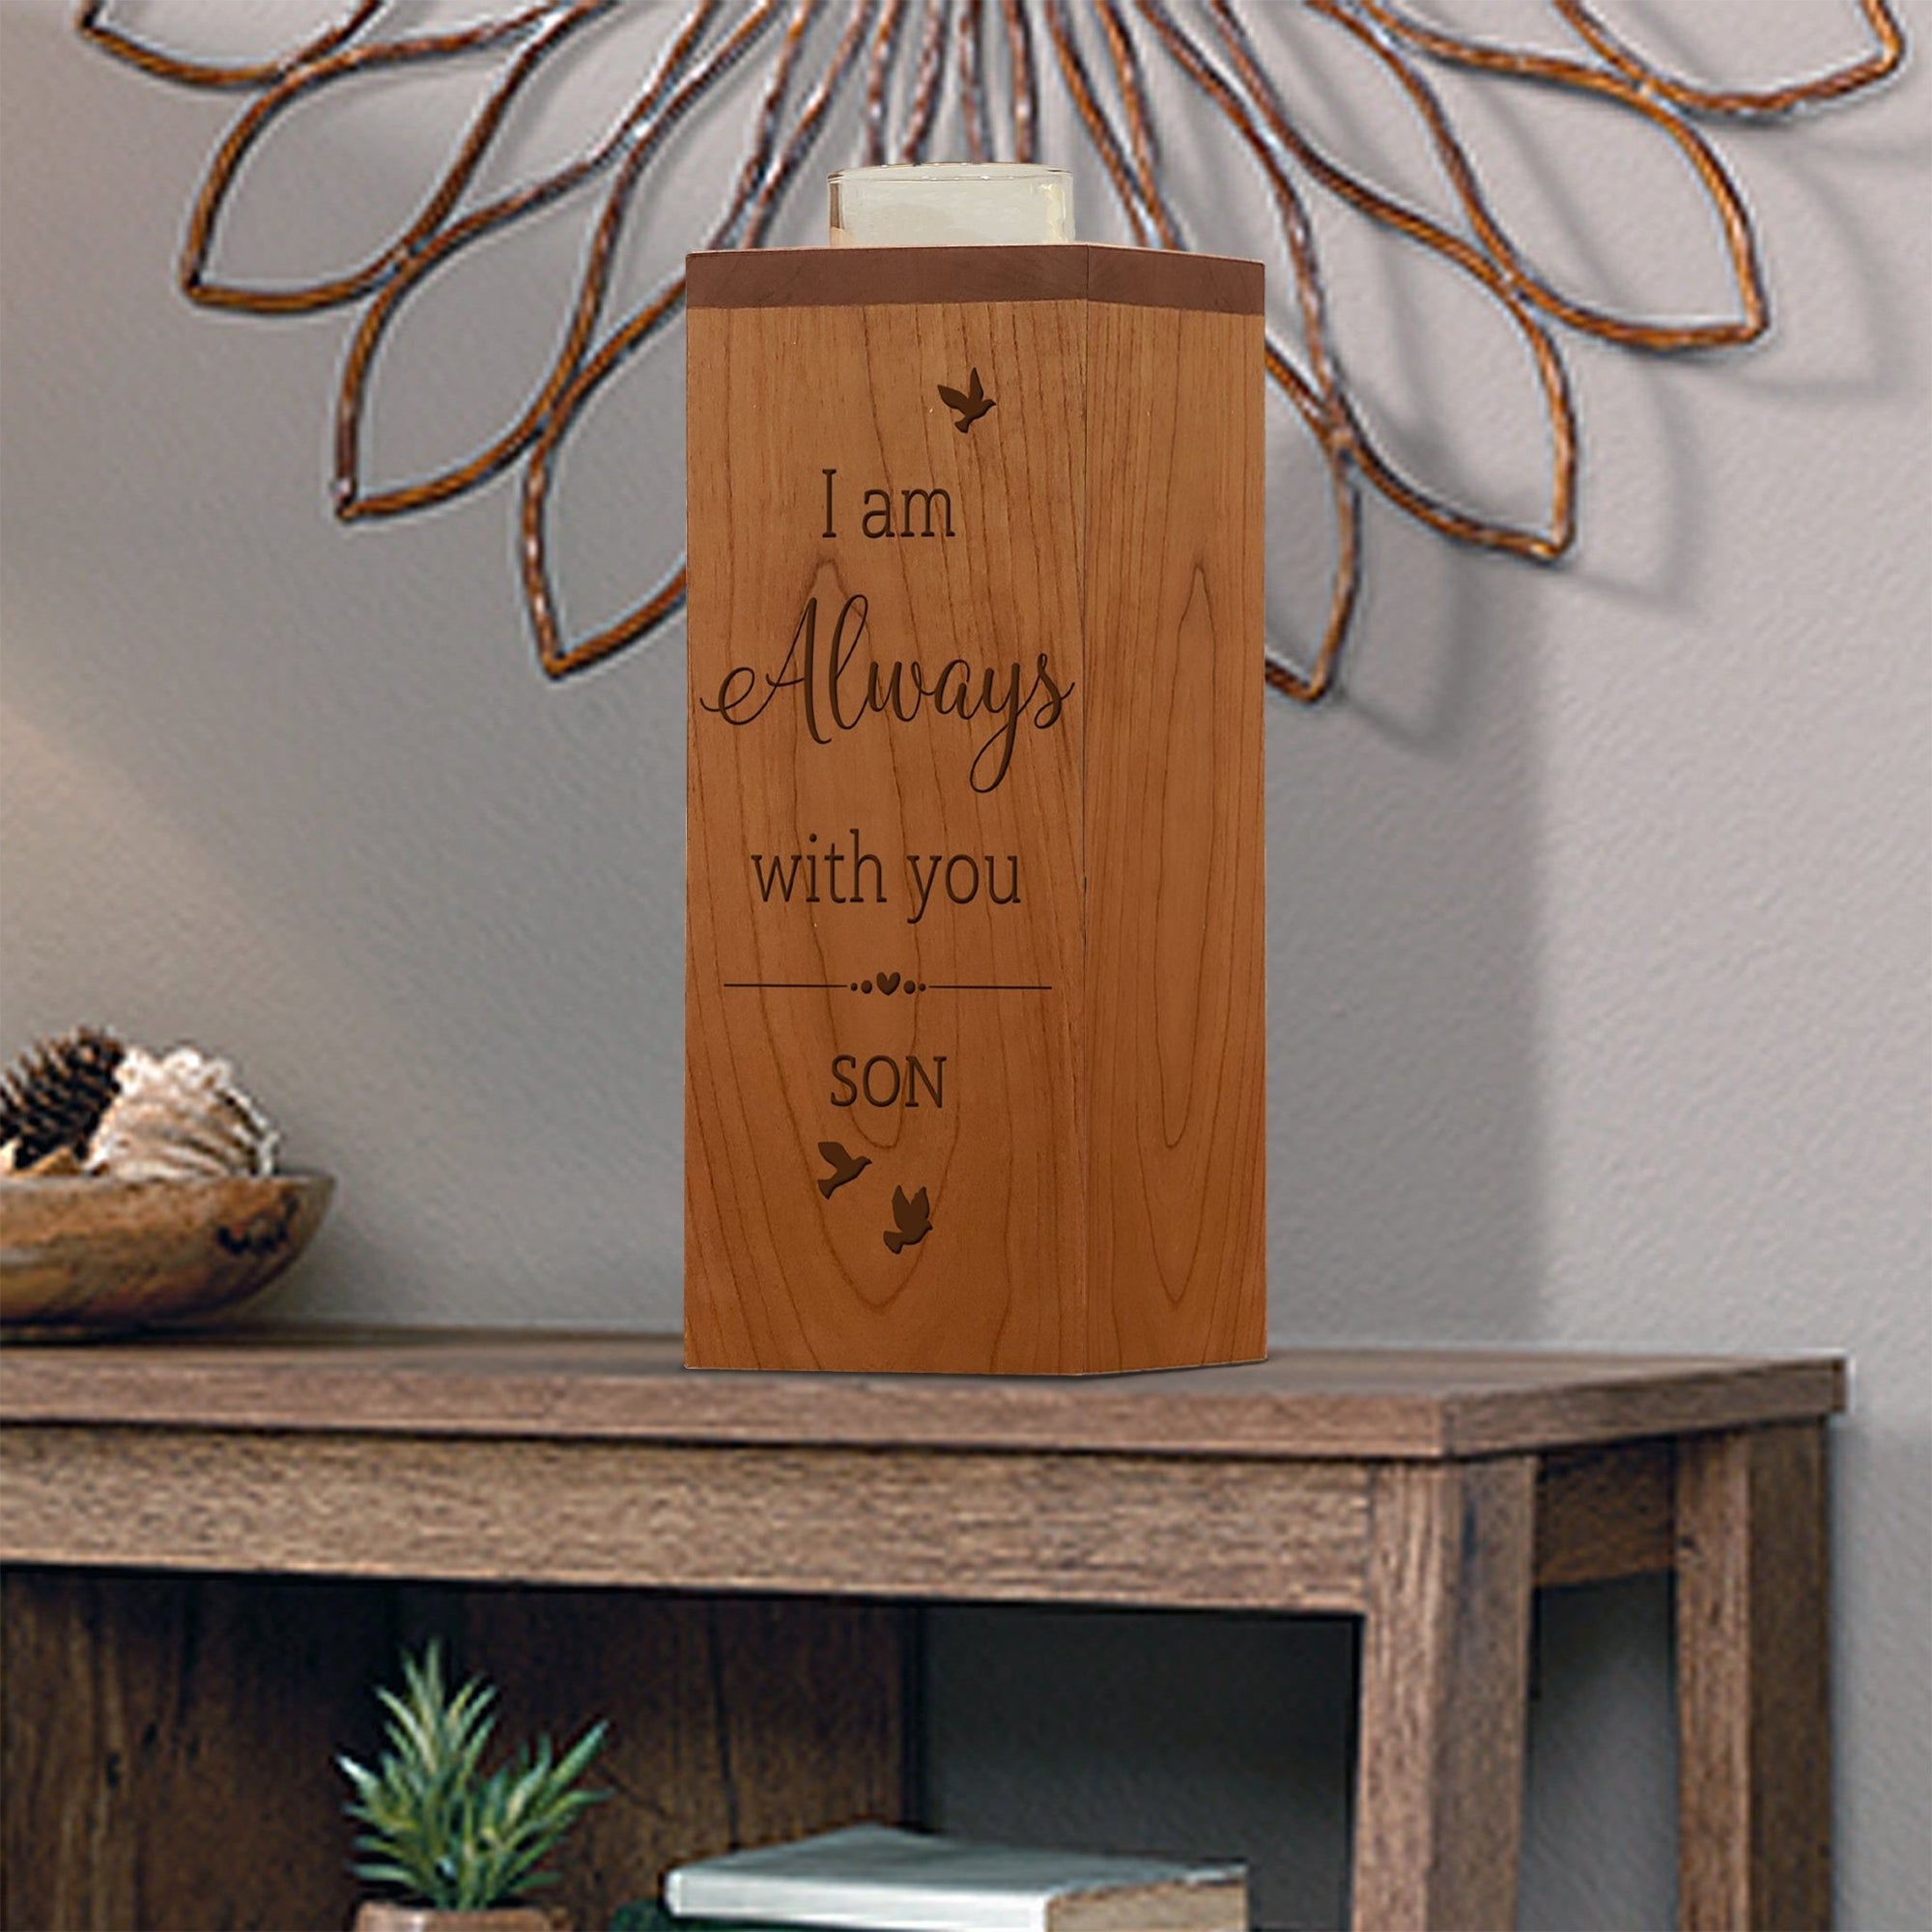 Cozy Cardinal Memorial Vertical Urns With Single Candle Holder For Human Ashes - I Am Always Son - LifeSong Milestones